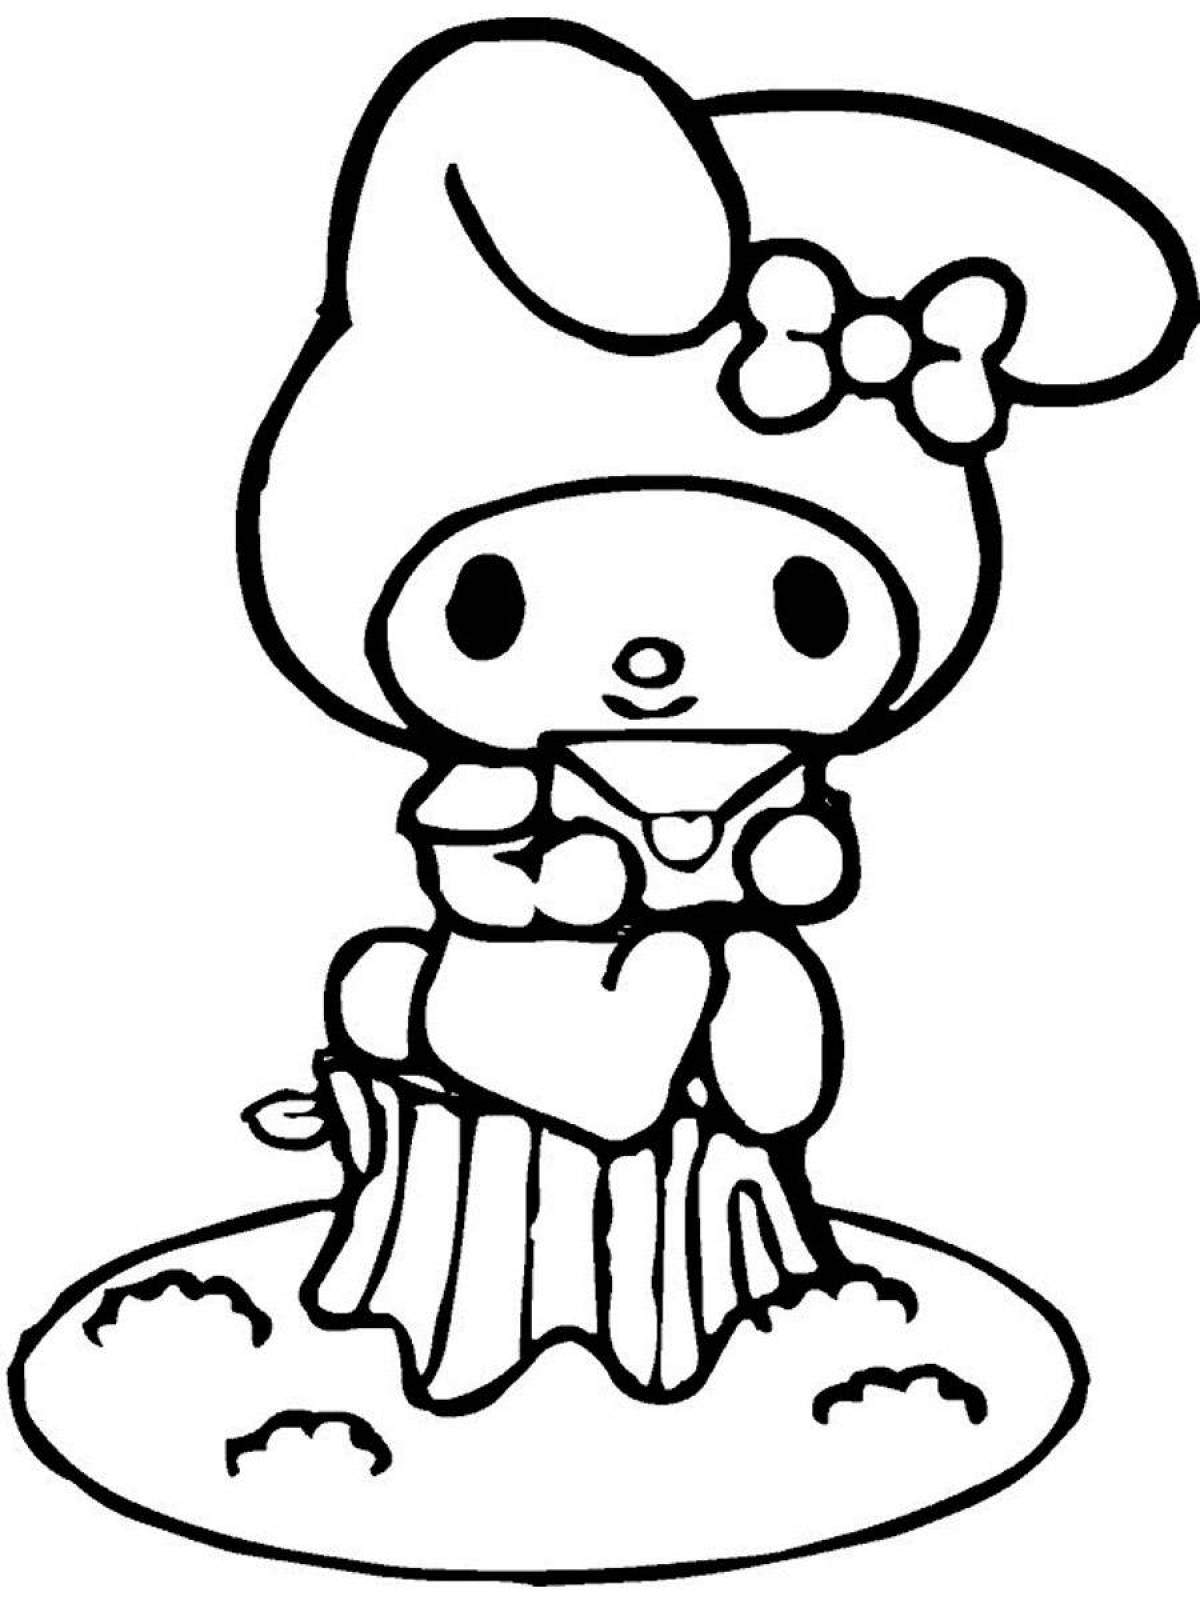 Coloring hello kitty blissful melodies